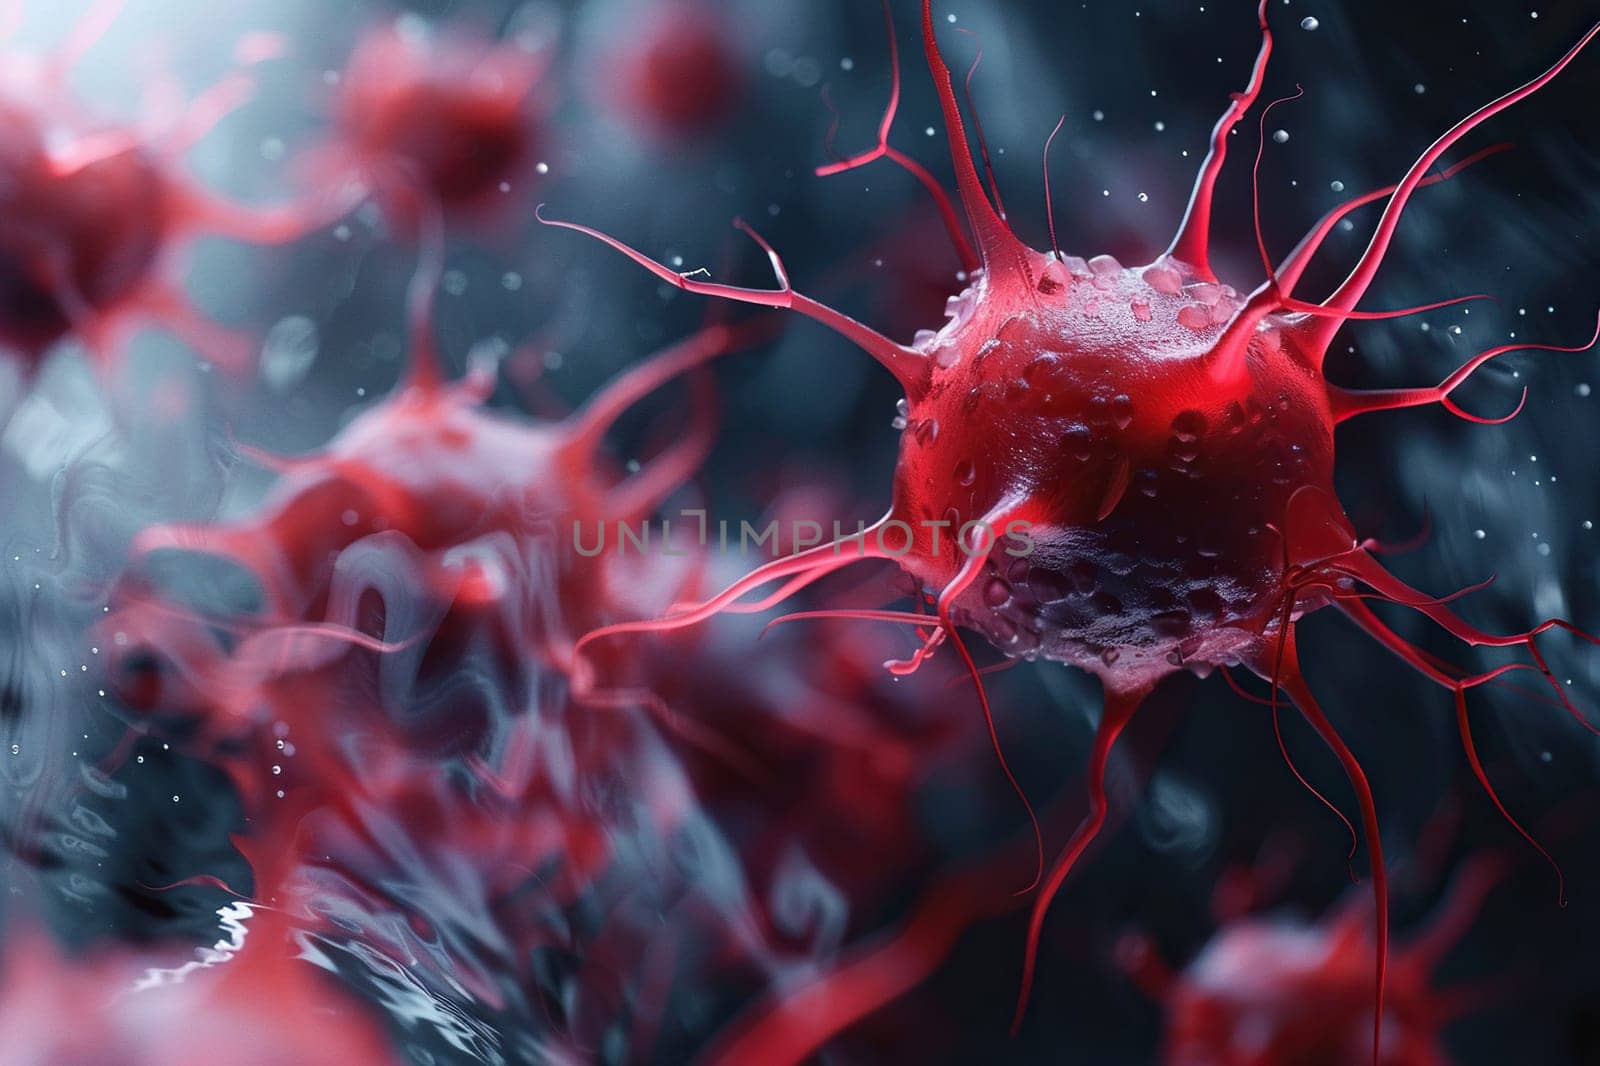 Macro 3D illustration of leukocytes and platelets in the blood stream. Biomedicine concept. Generated by artificial intelligence by Vovmar